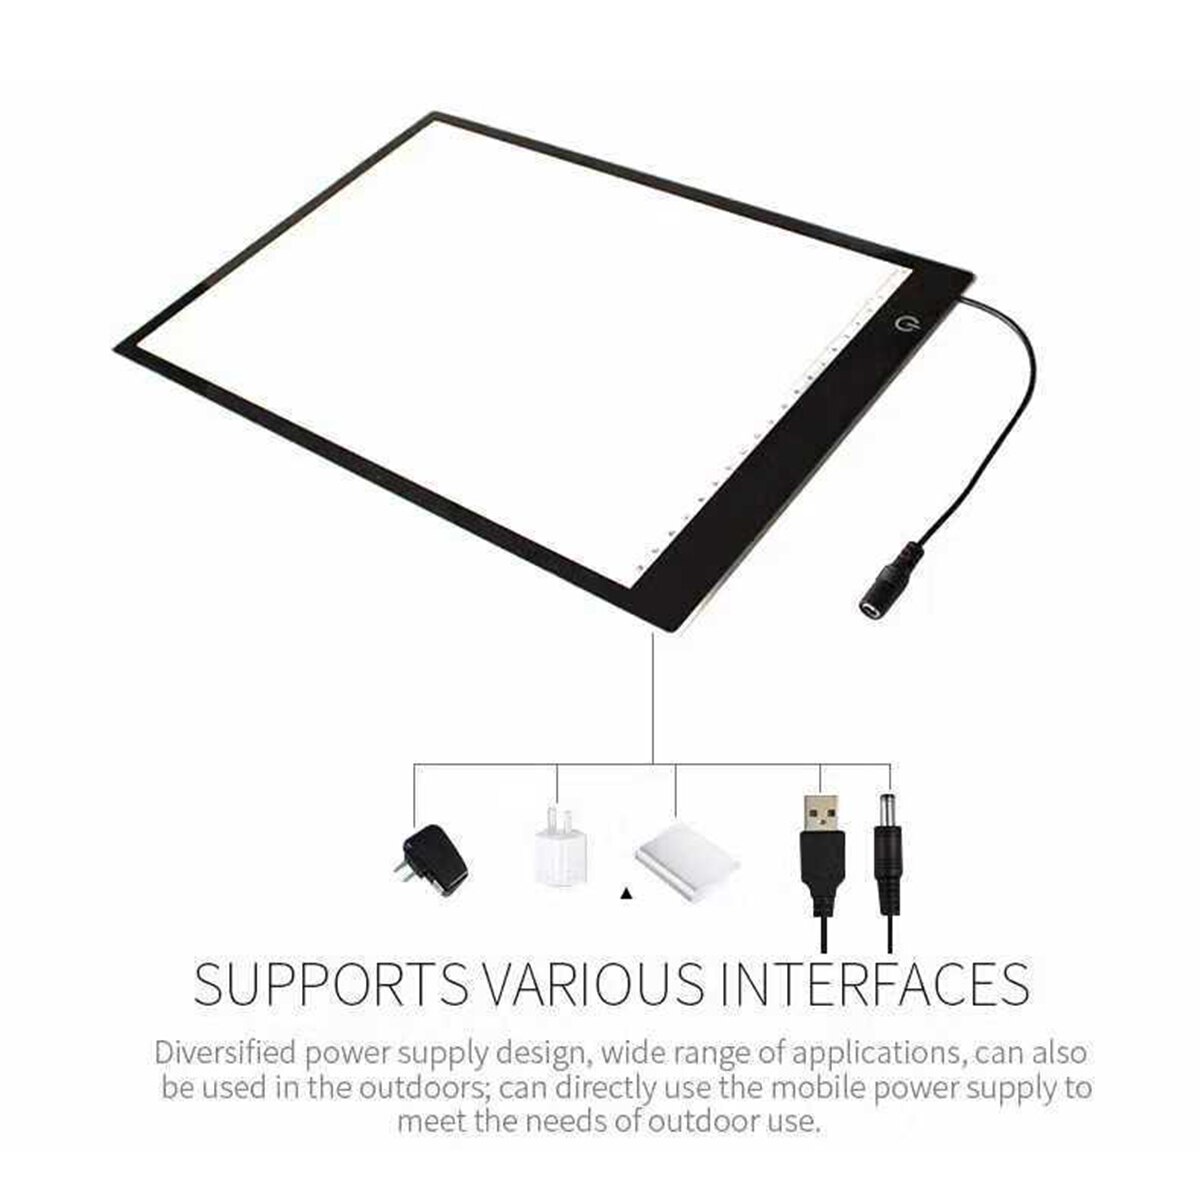 A3 A4 A5 Graphic Tablet LED Tracing Light Box Ultra Thin Stepless Dimmable Brightness Artcraft Light Table Pad Board with Scale